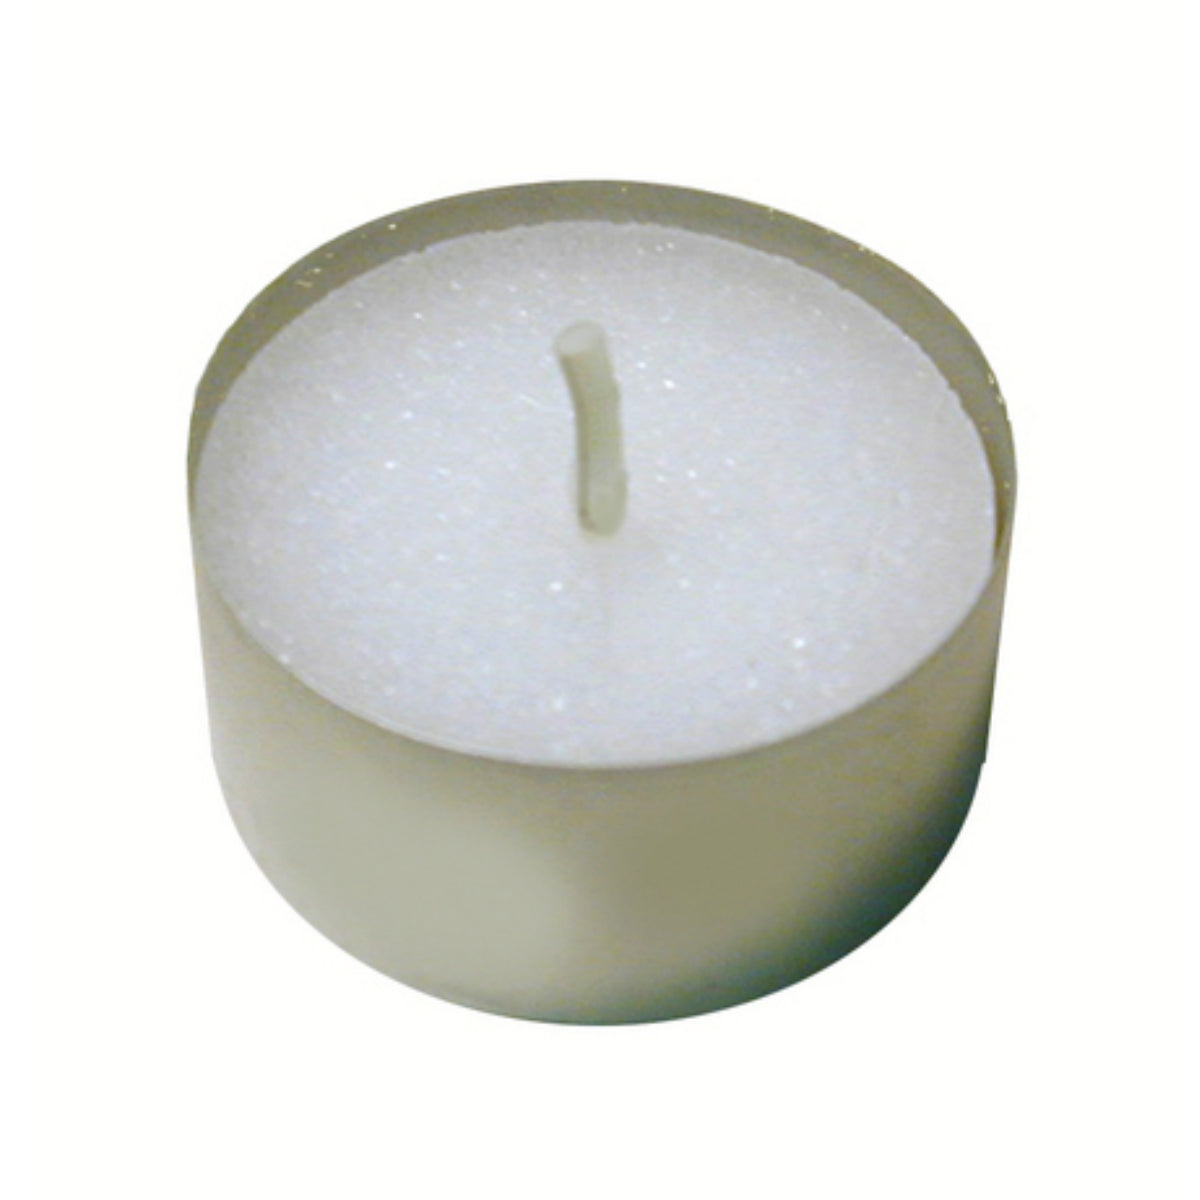 Candle-Lite 1261595 Unscented Tea Light, White, Bag of 50